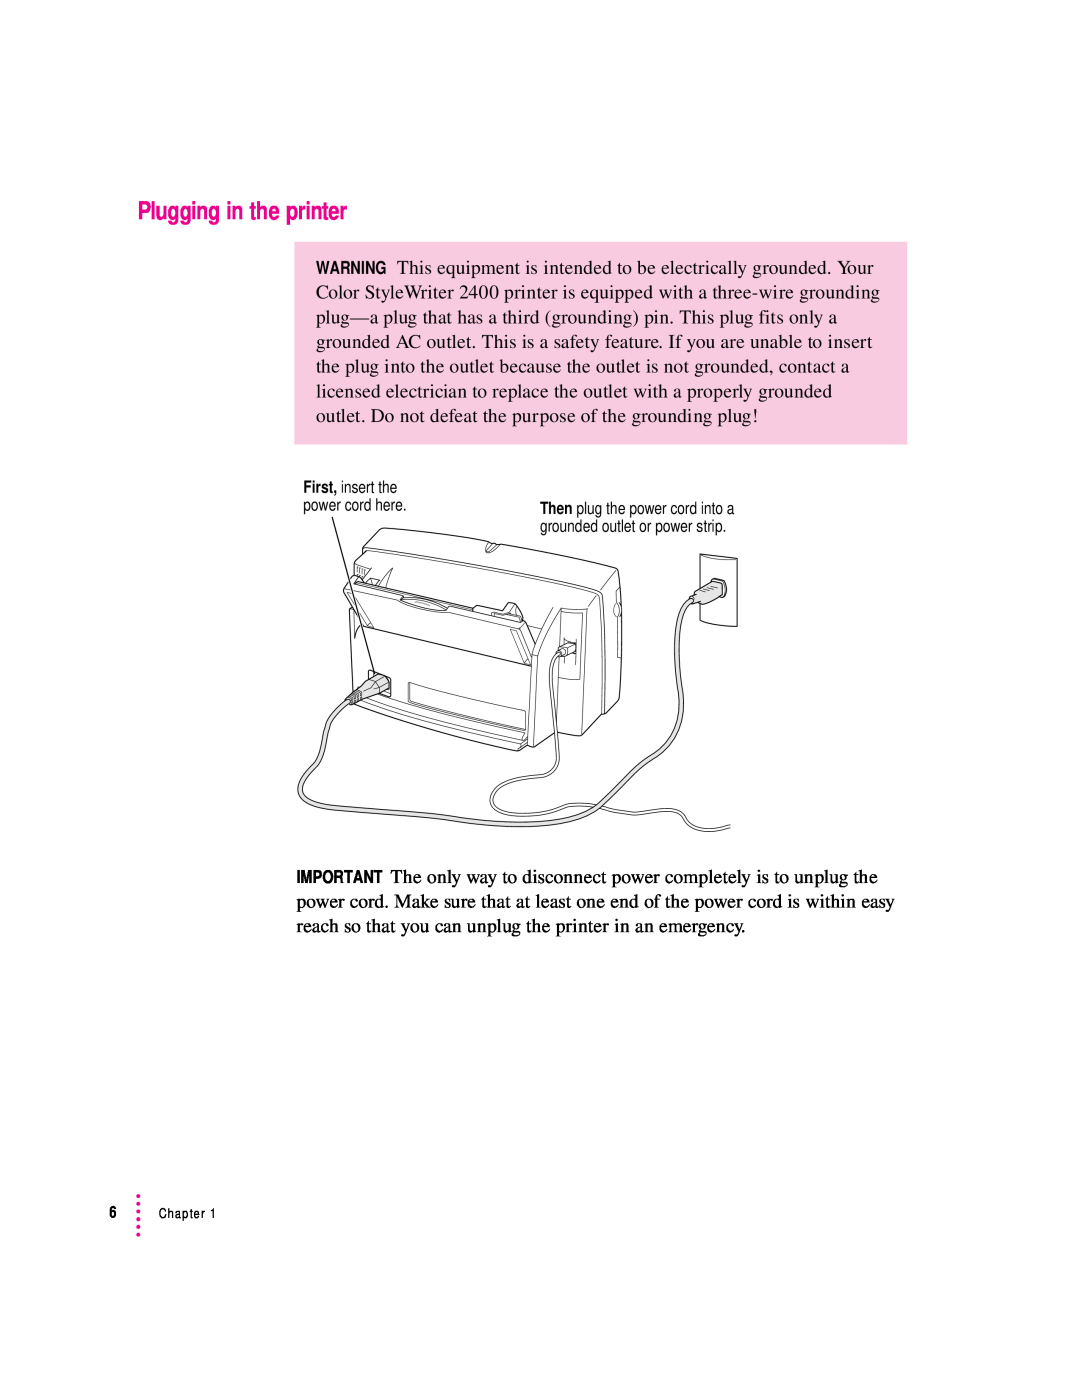 Apple 2400 manual Plugging in the printer, First, insert the 